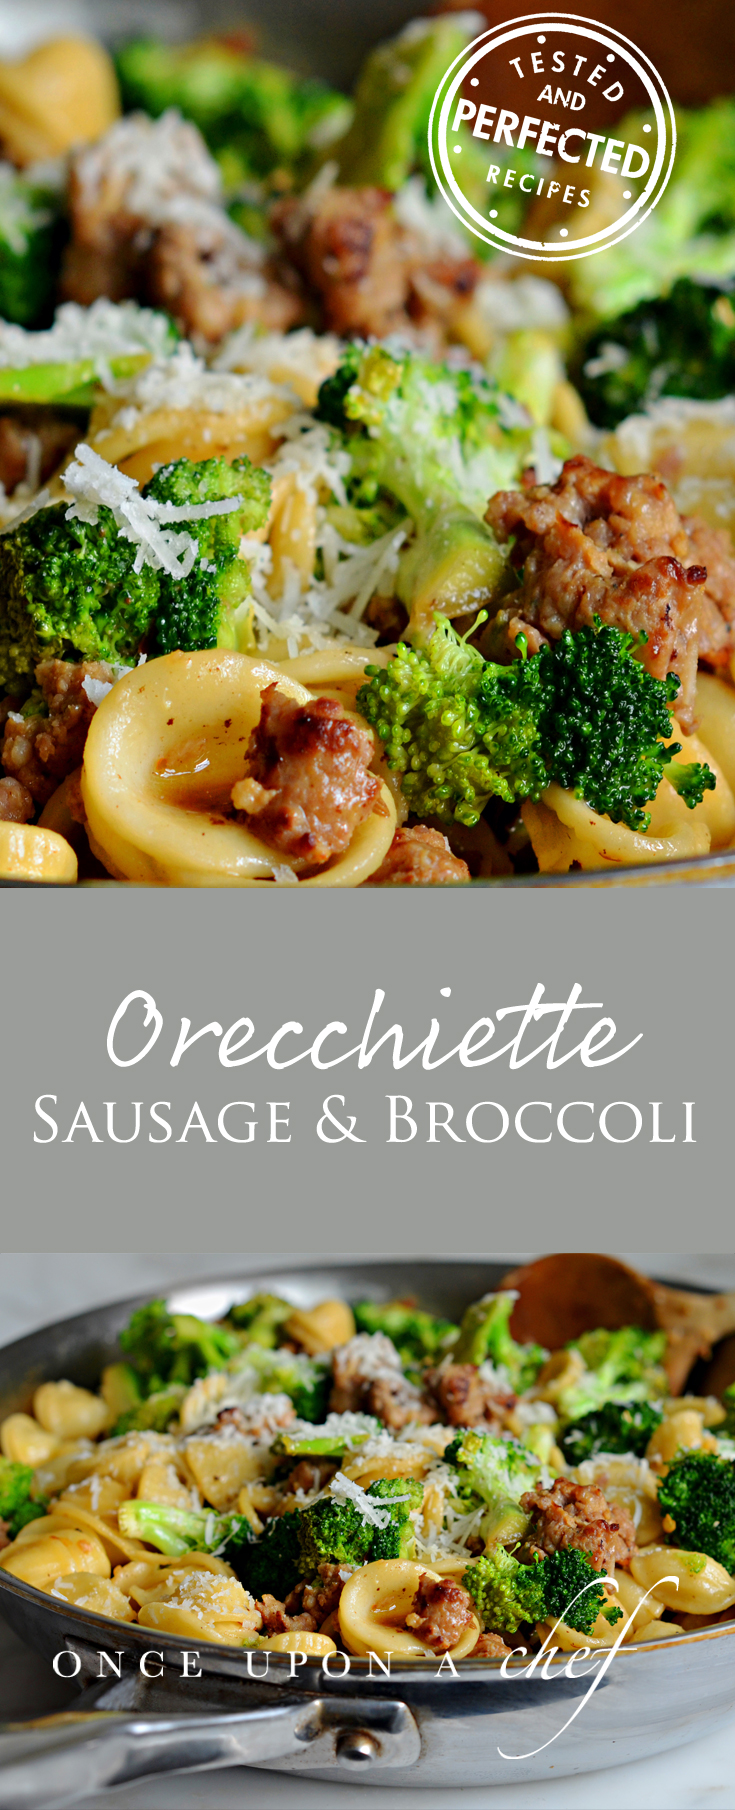 Orecchiette with Sausage and Broccoli - Once Upon a Chef